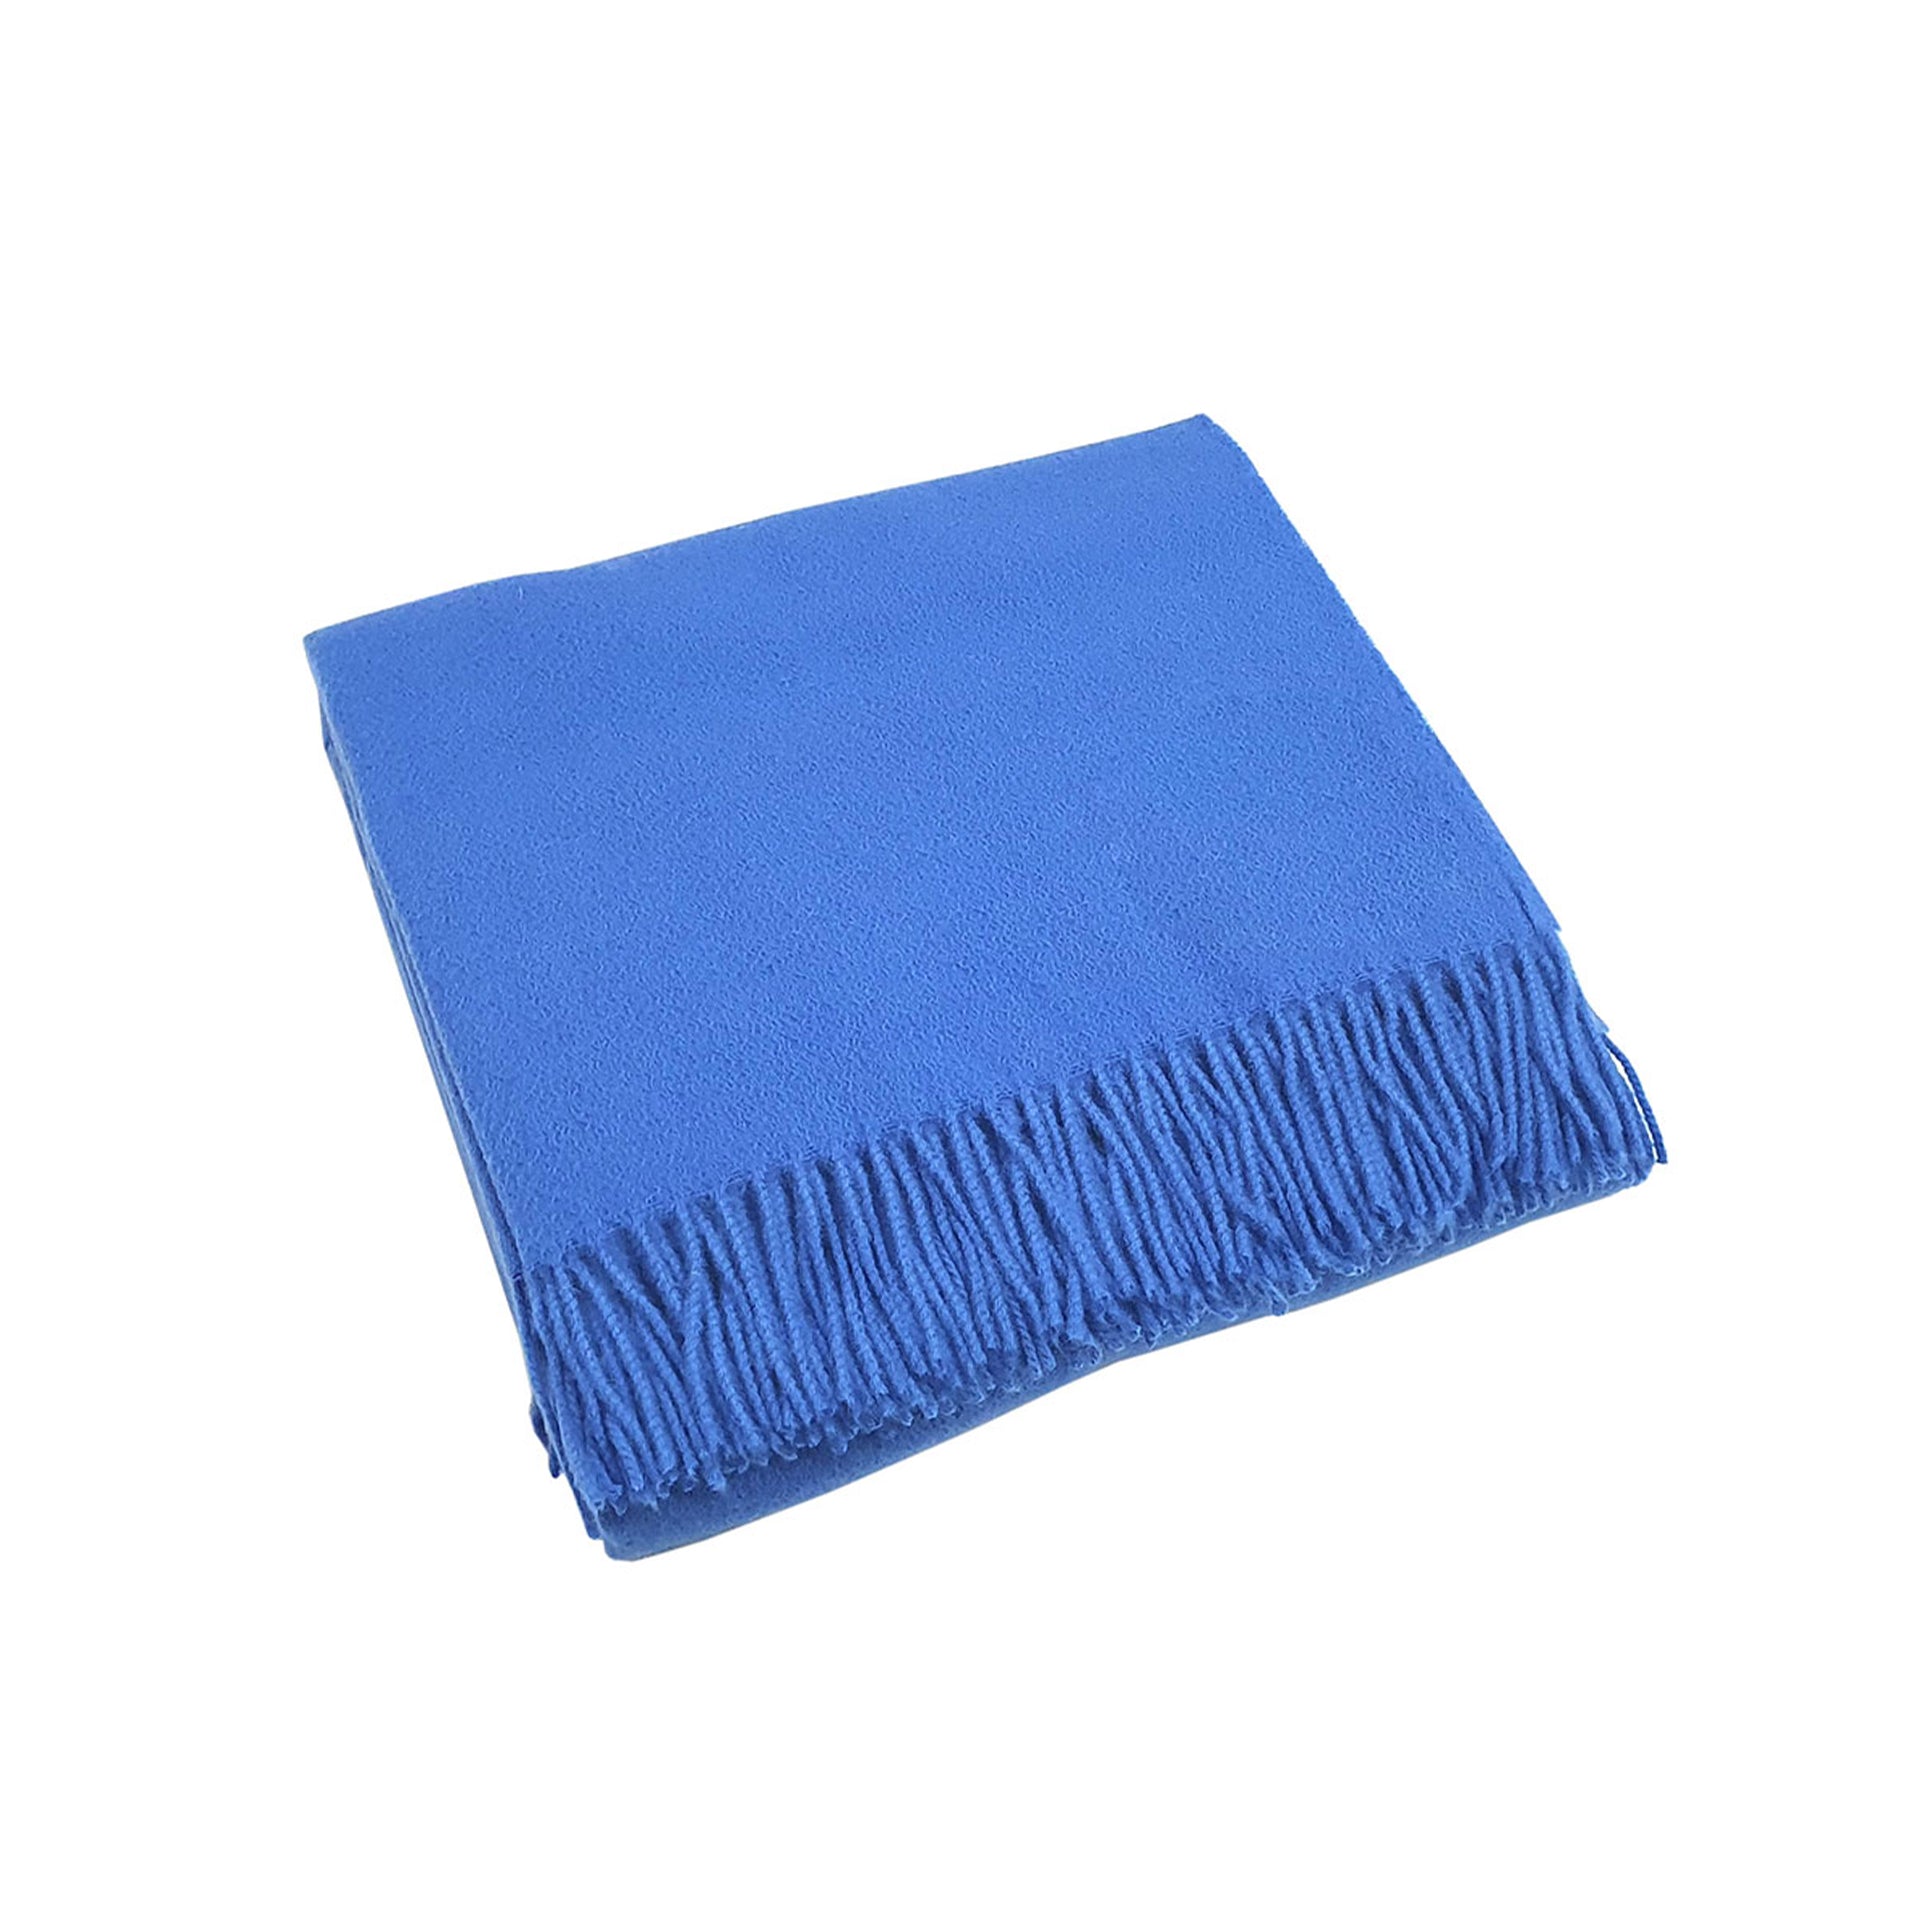 scandia home jaya cashmere throw folded in the color cornflower